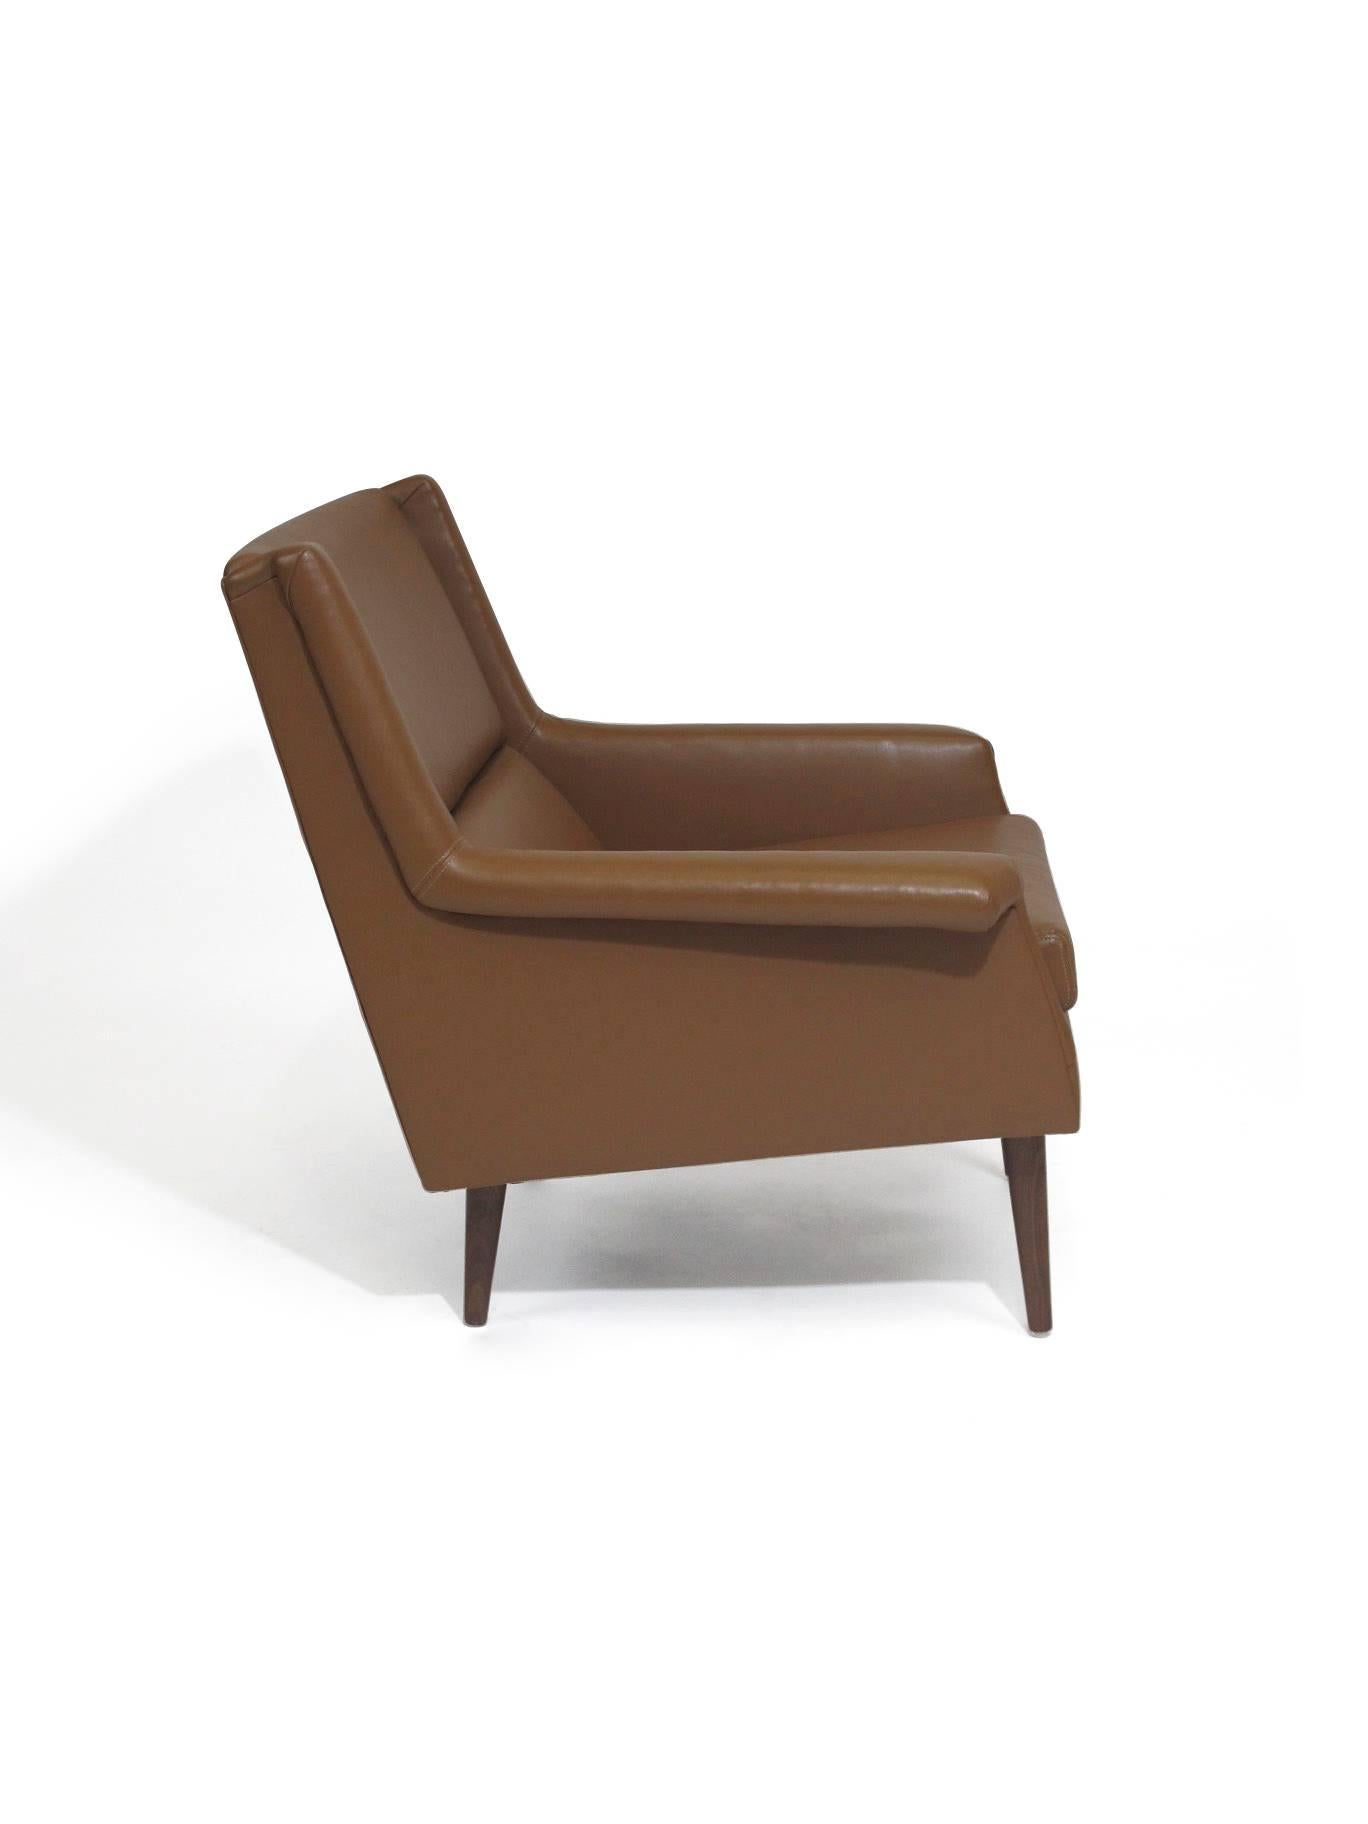 20th Century Milo Baughman for Thayer Coggin Brown Leather Lounge Chair